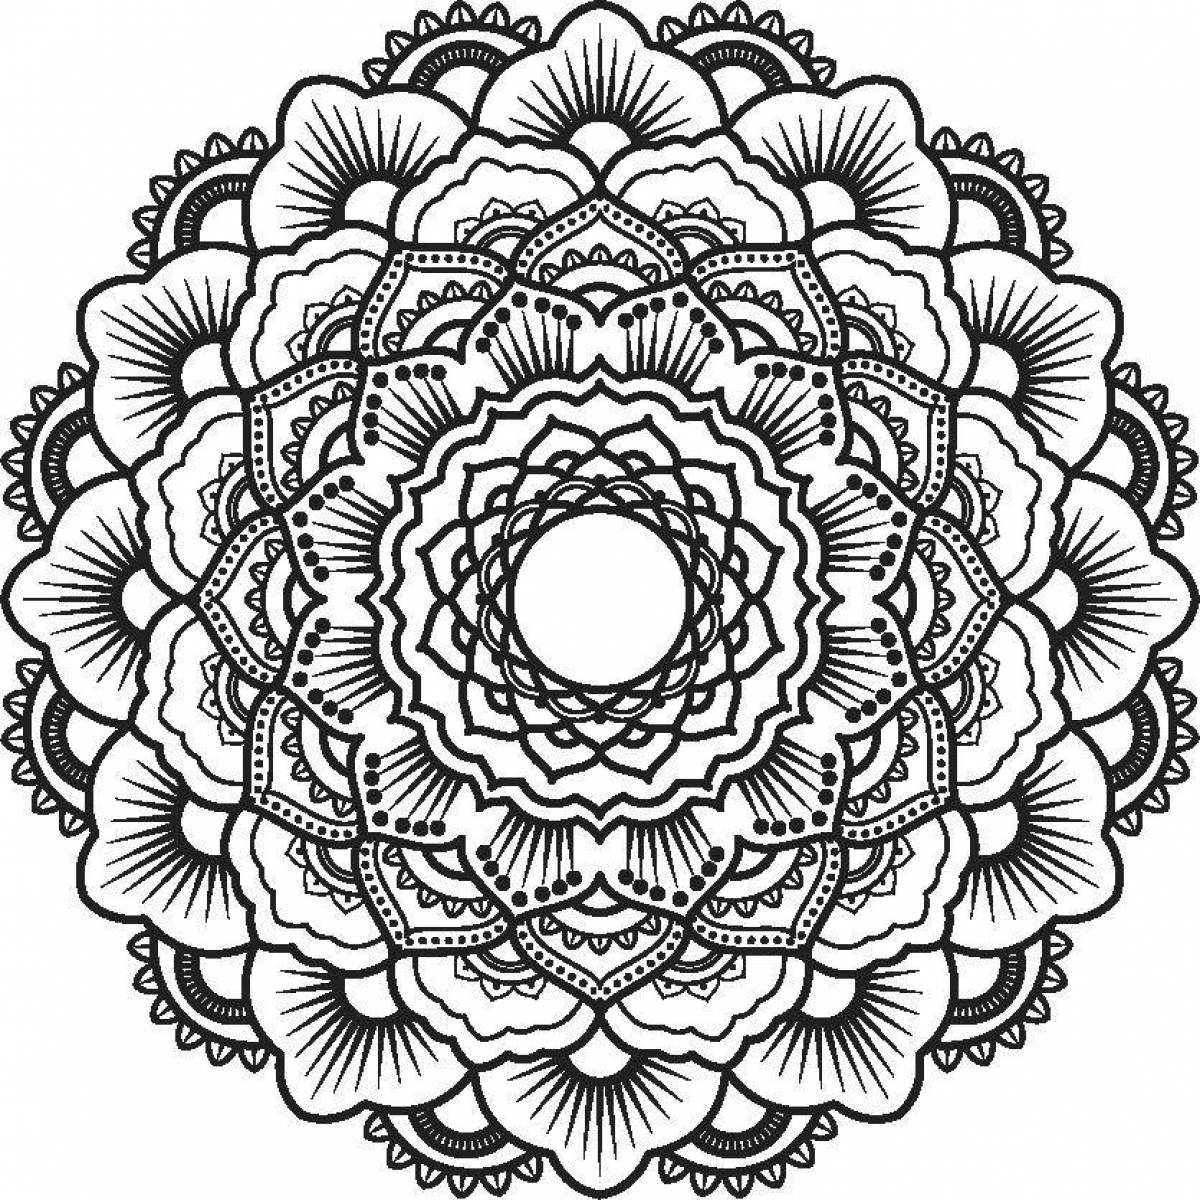 Blissful anti-stress spiral coloring